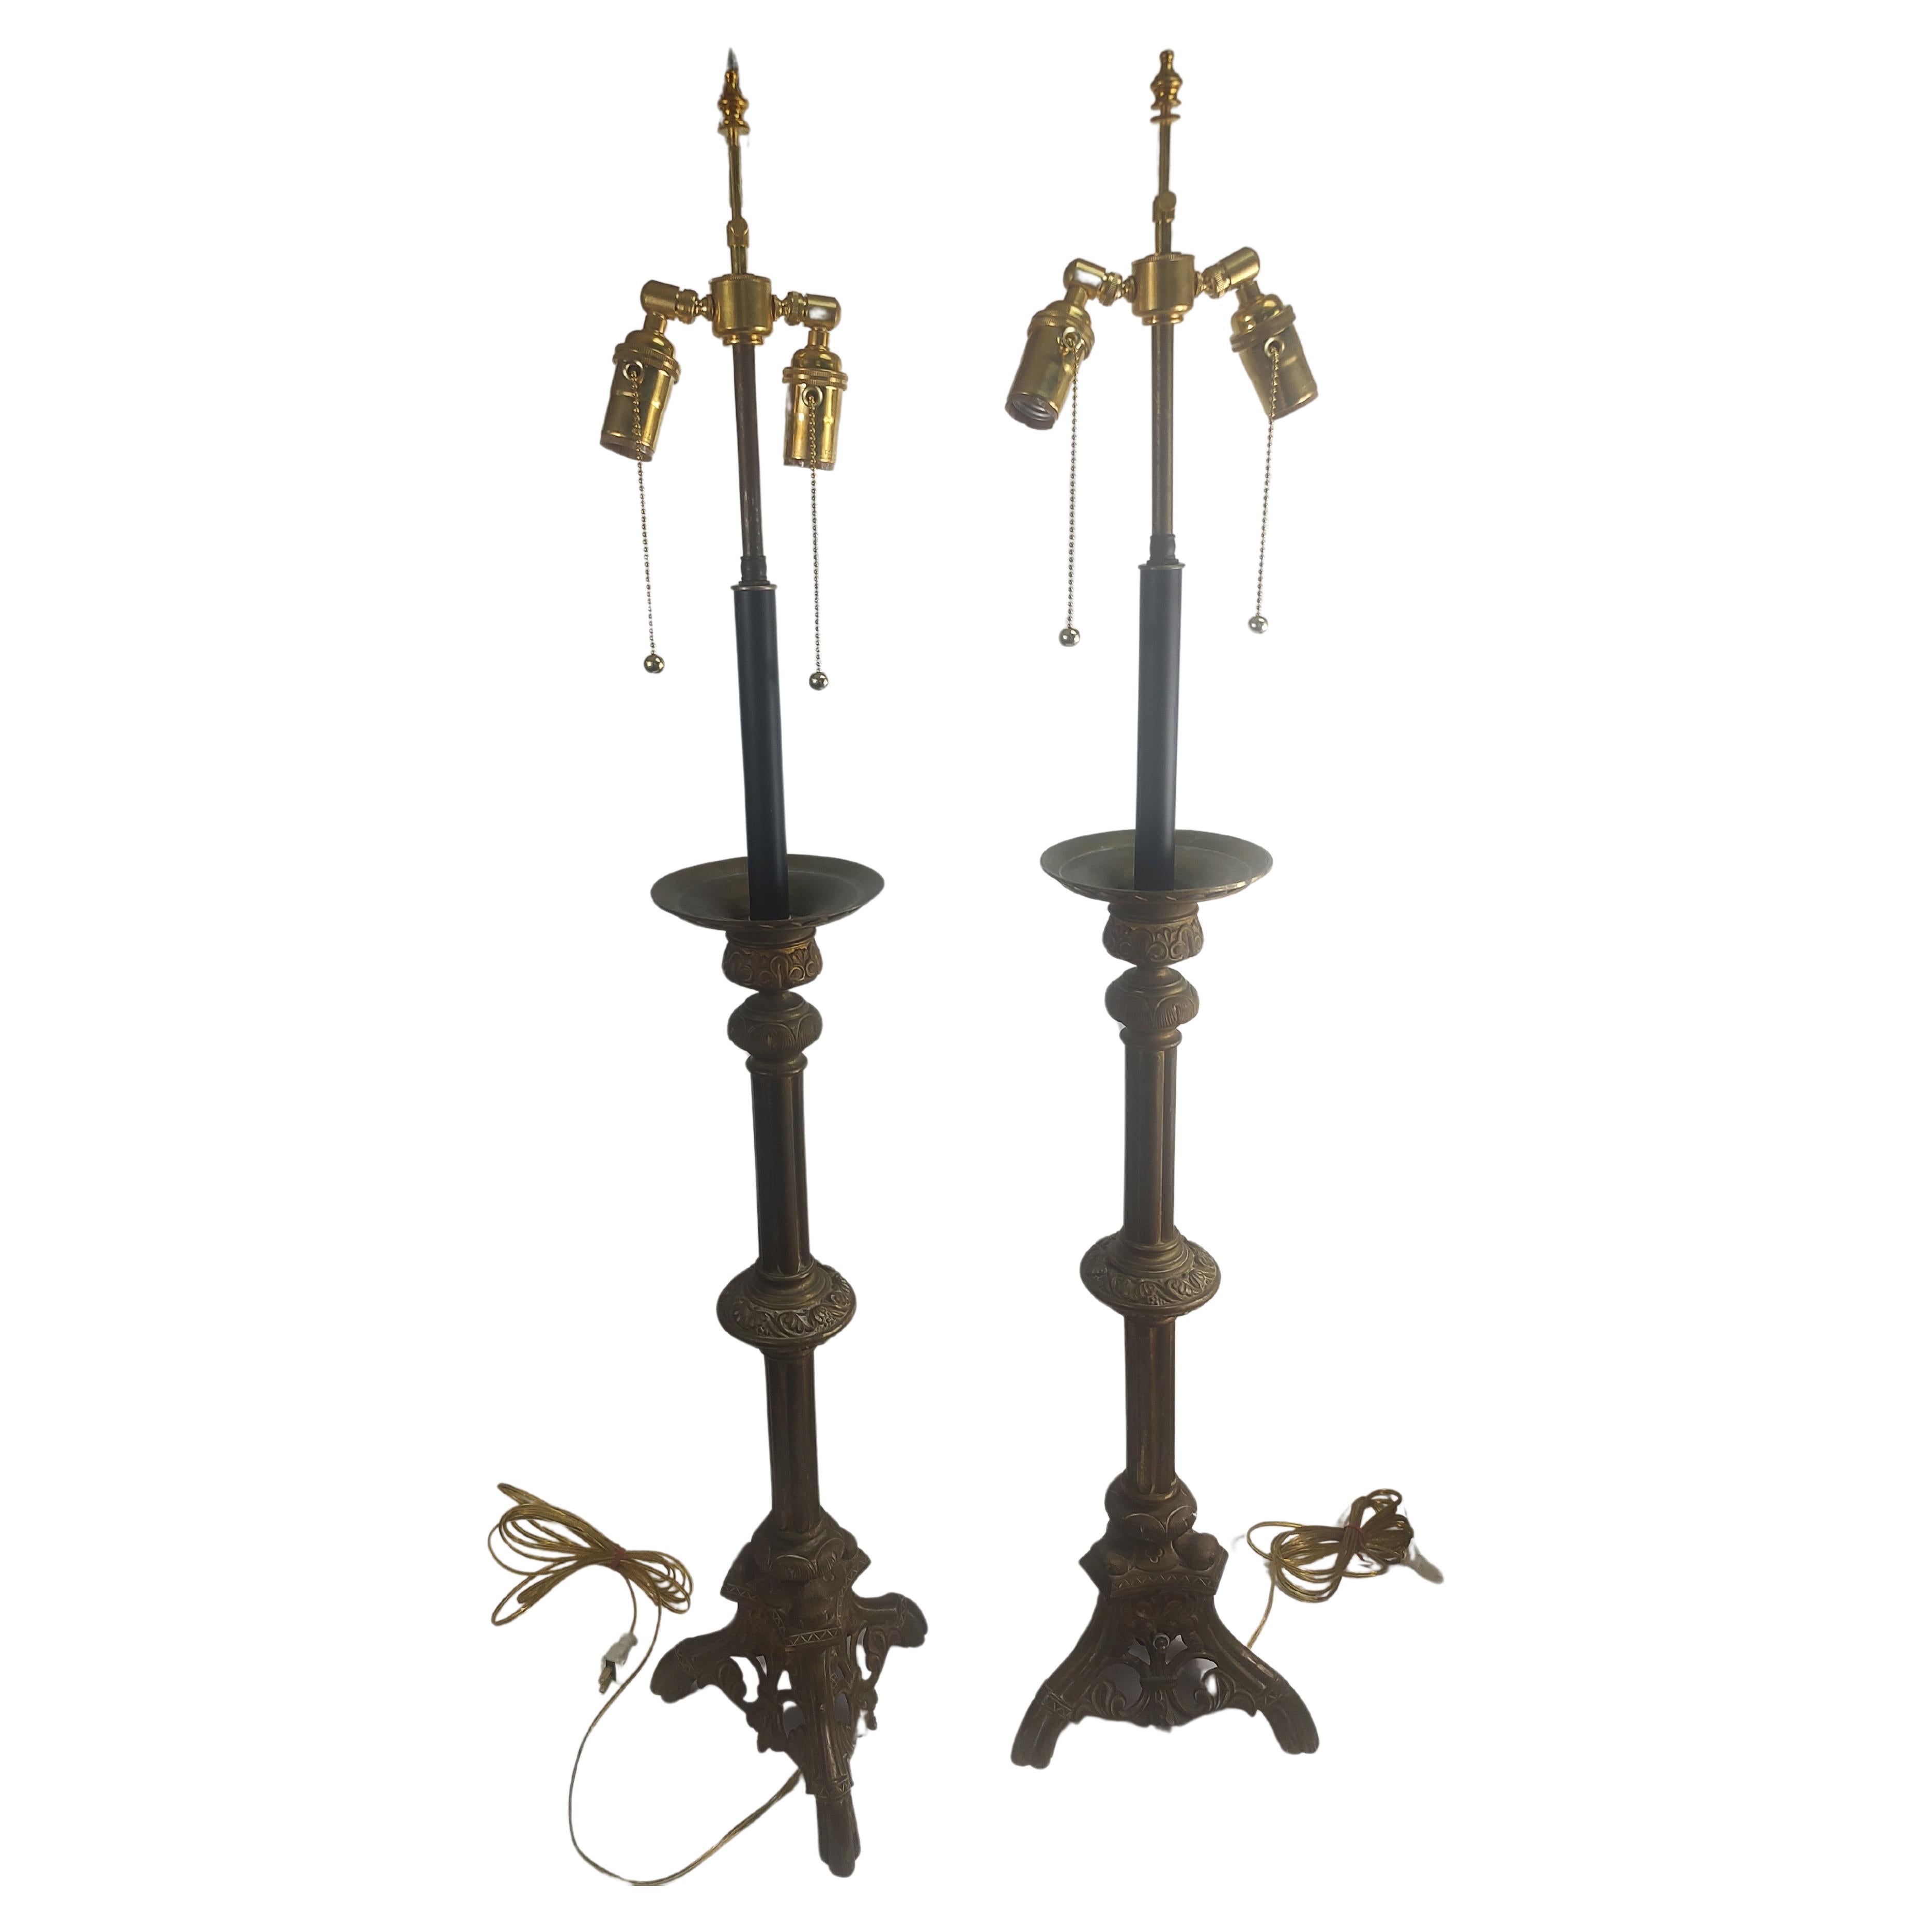 Pair of Solid Brass Ecclesiastical Candlesticks Lamped C1910 For Sale